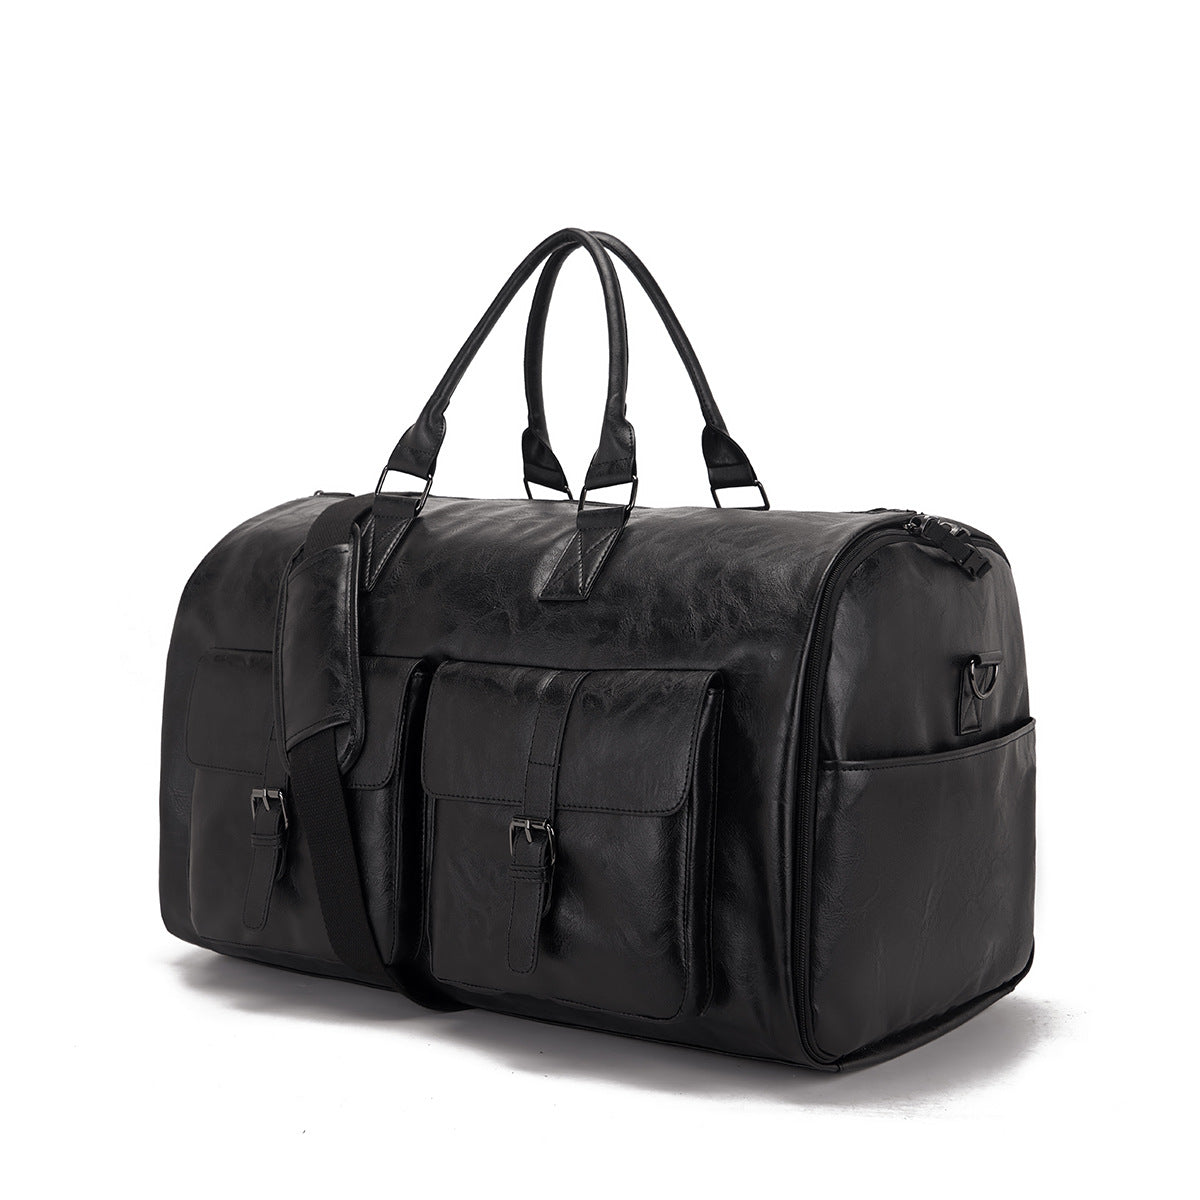 Travel convenient carry-on clothing bag